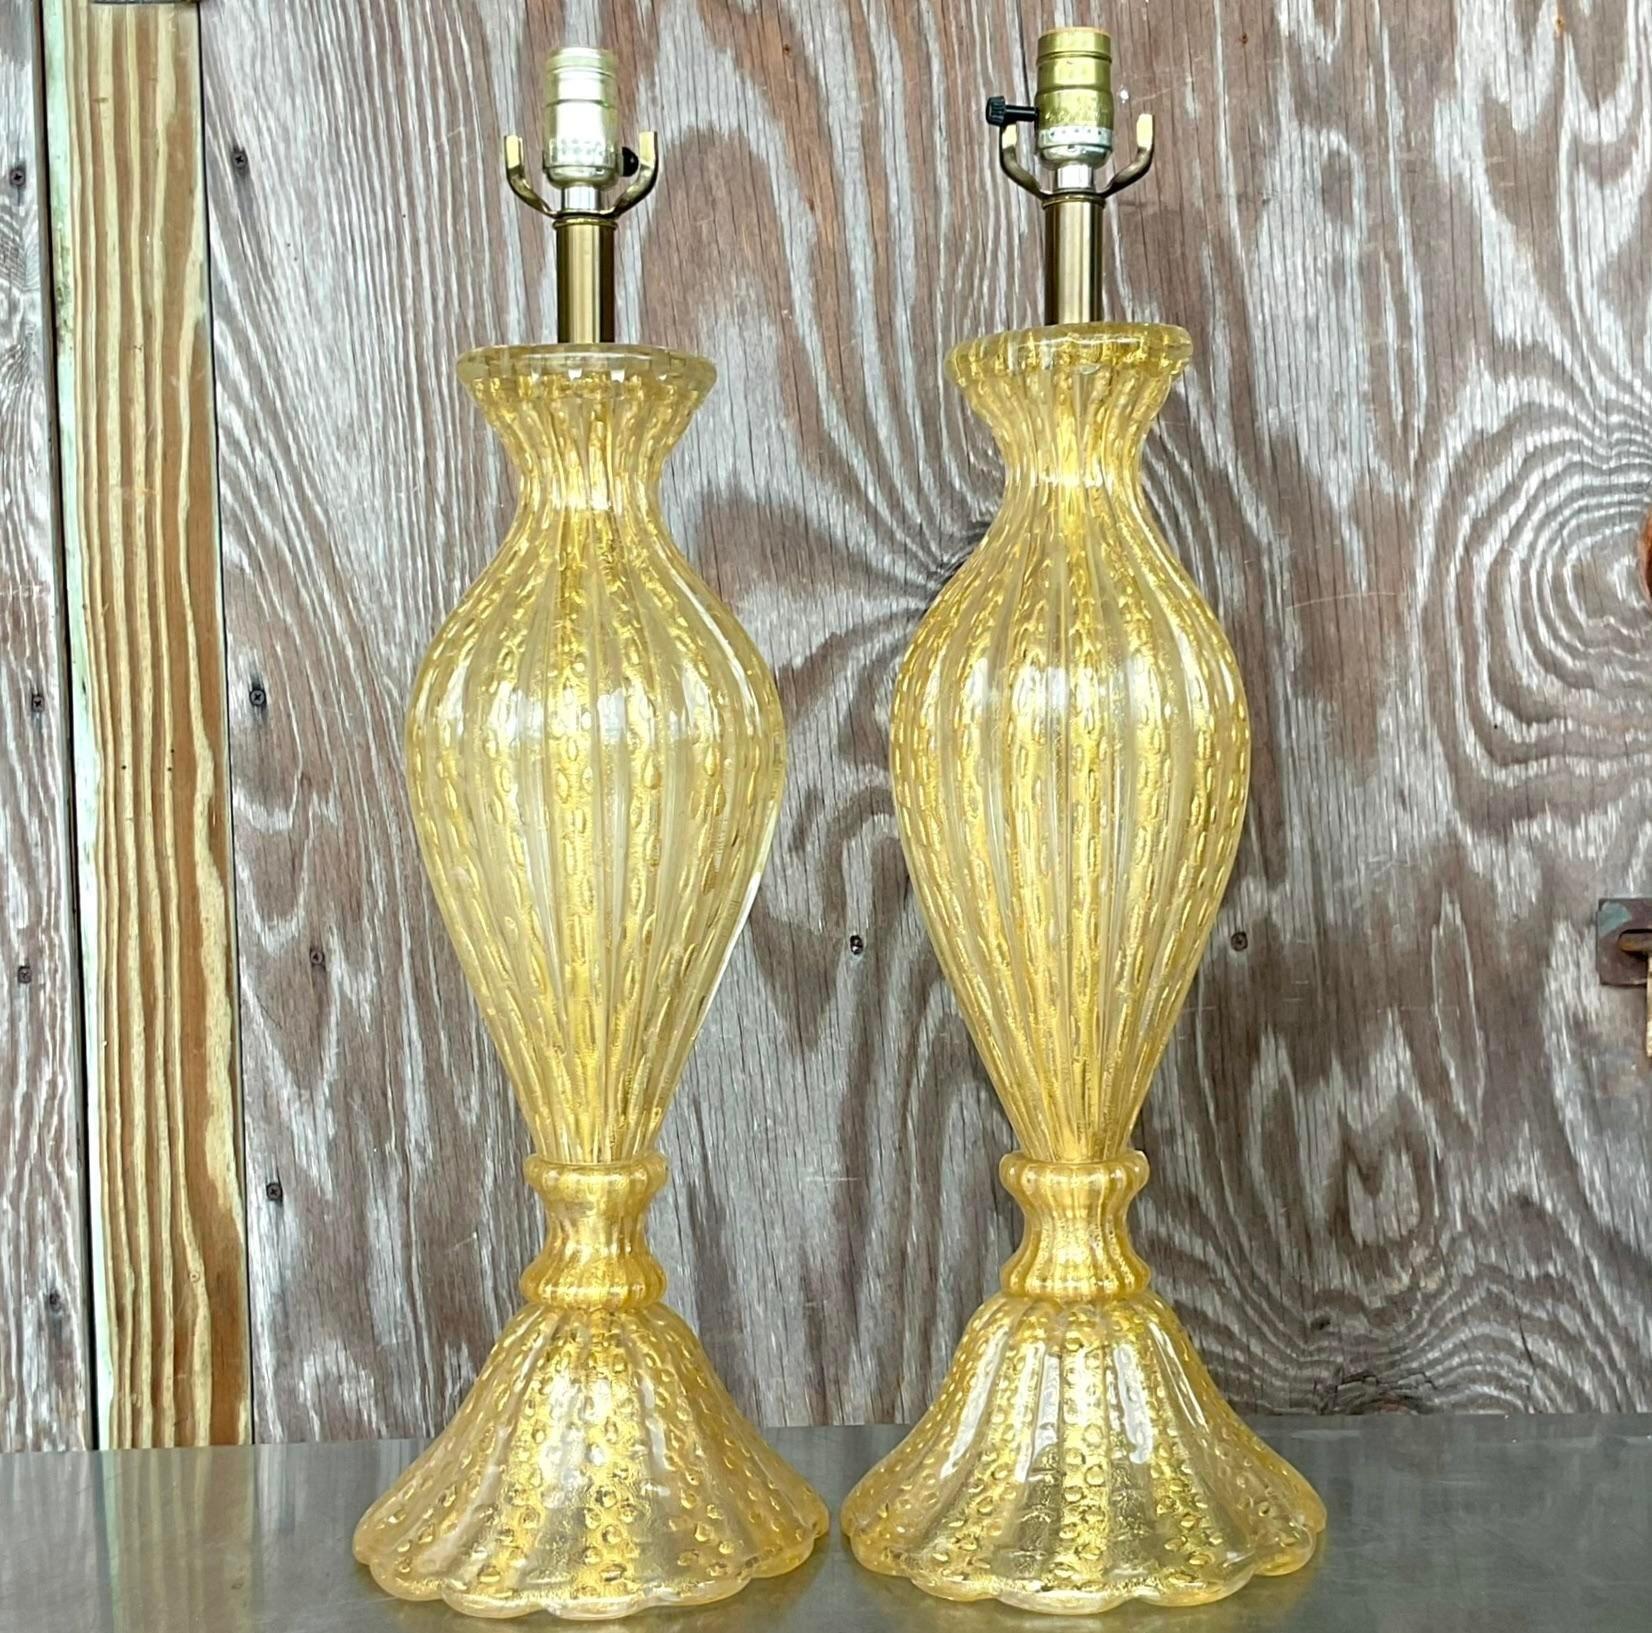 Italian Vintage Regency Restored Murano Glass Table Lamps - a Pair For Sale